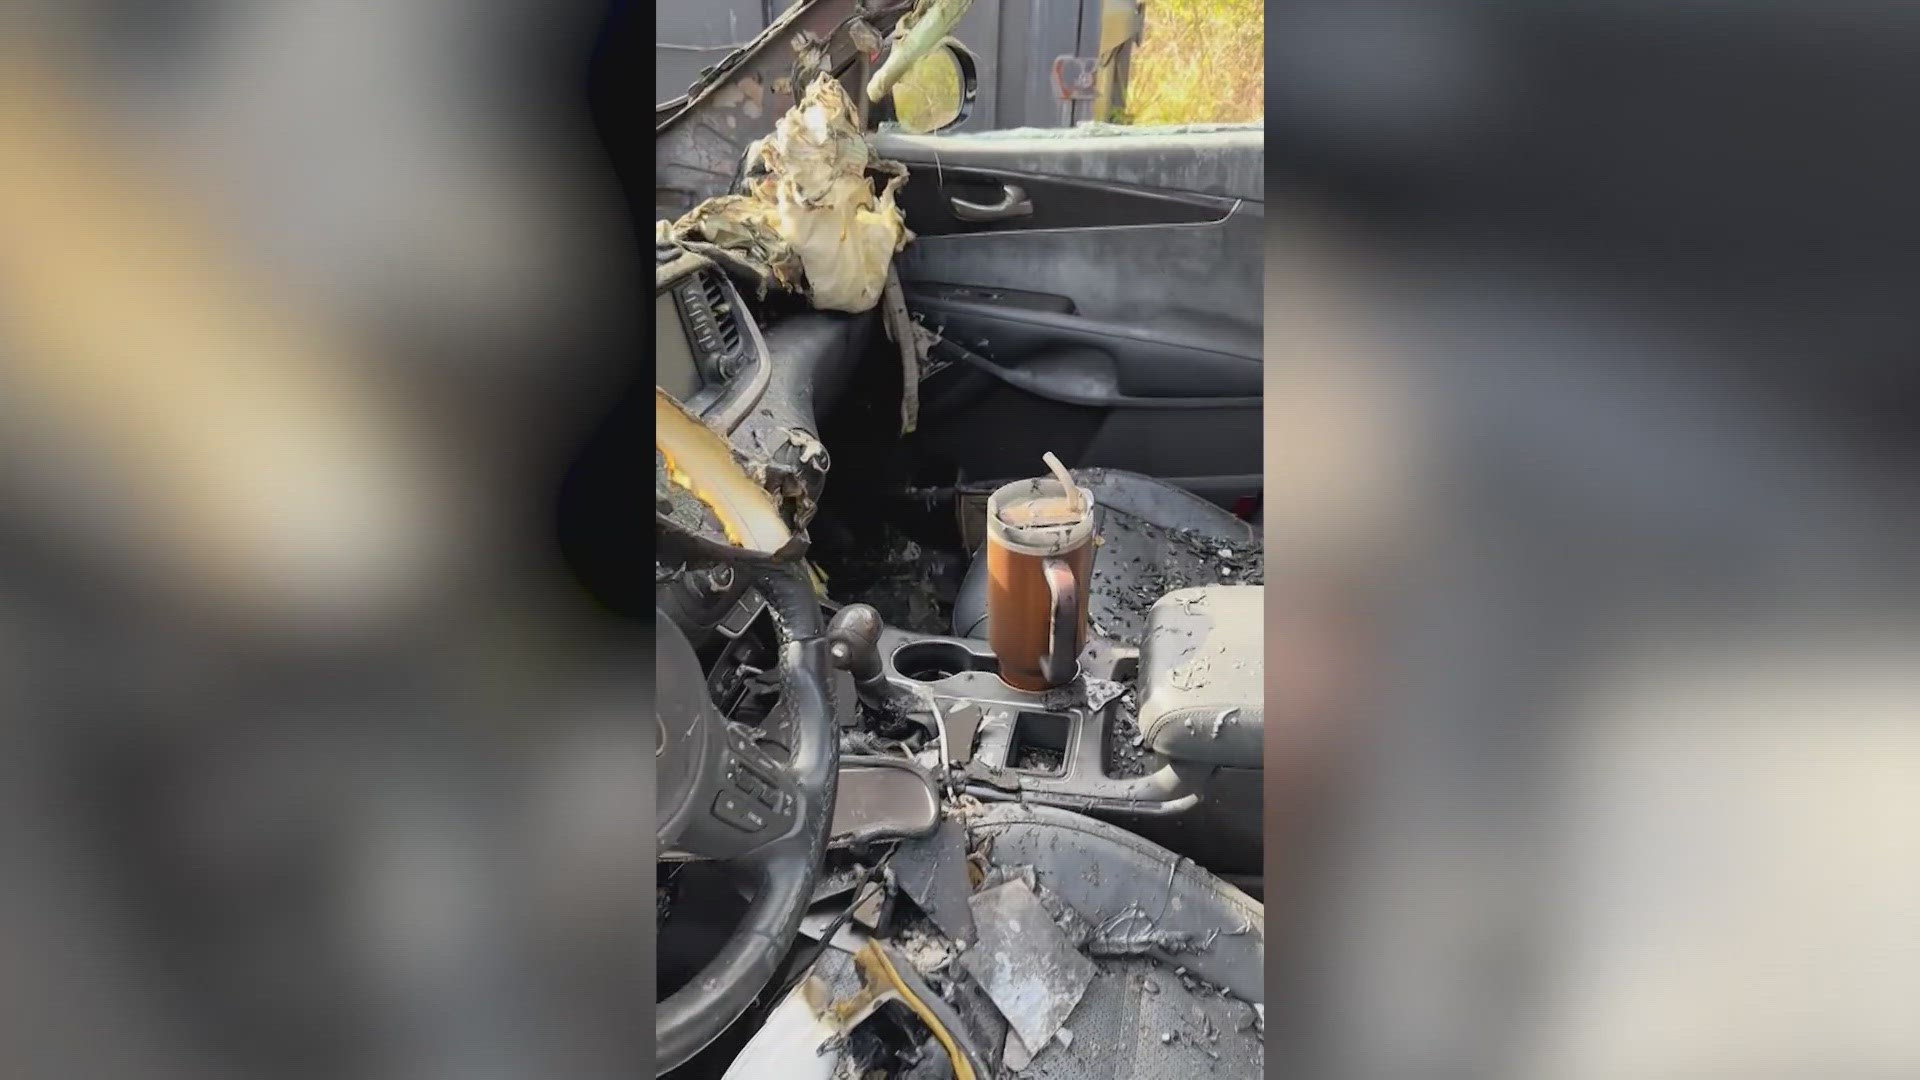 Stanley tumbler survives car fire, leads to new car from cup maker